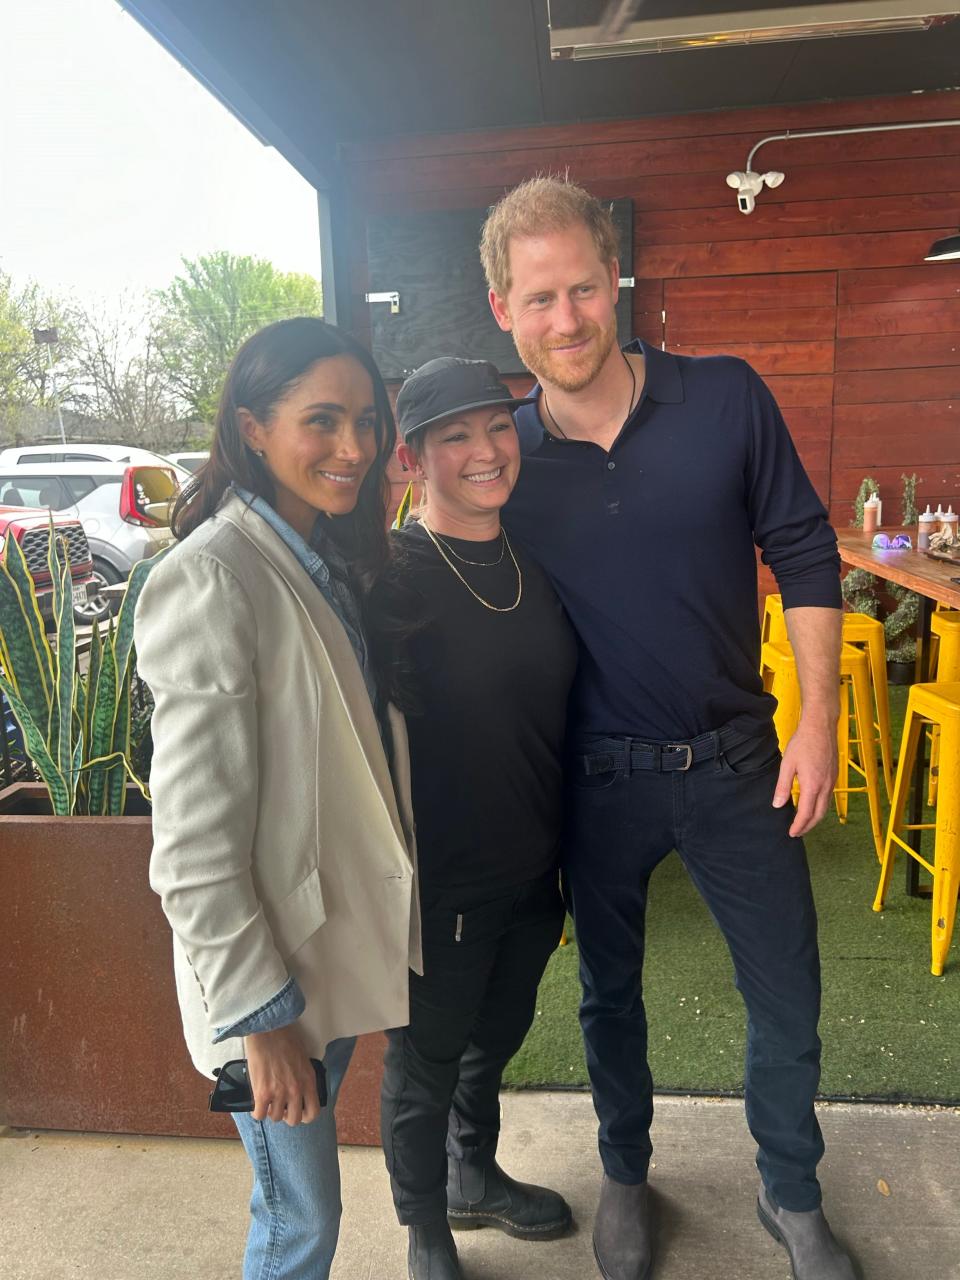 Prince Harry and Meghan visit La Barbecue in Austin and pose for a photo with owner Ali Clem.